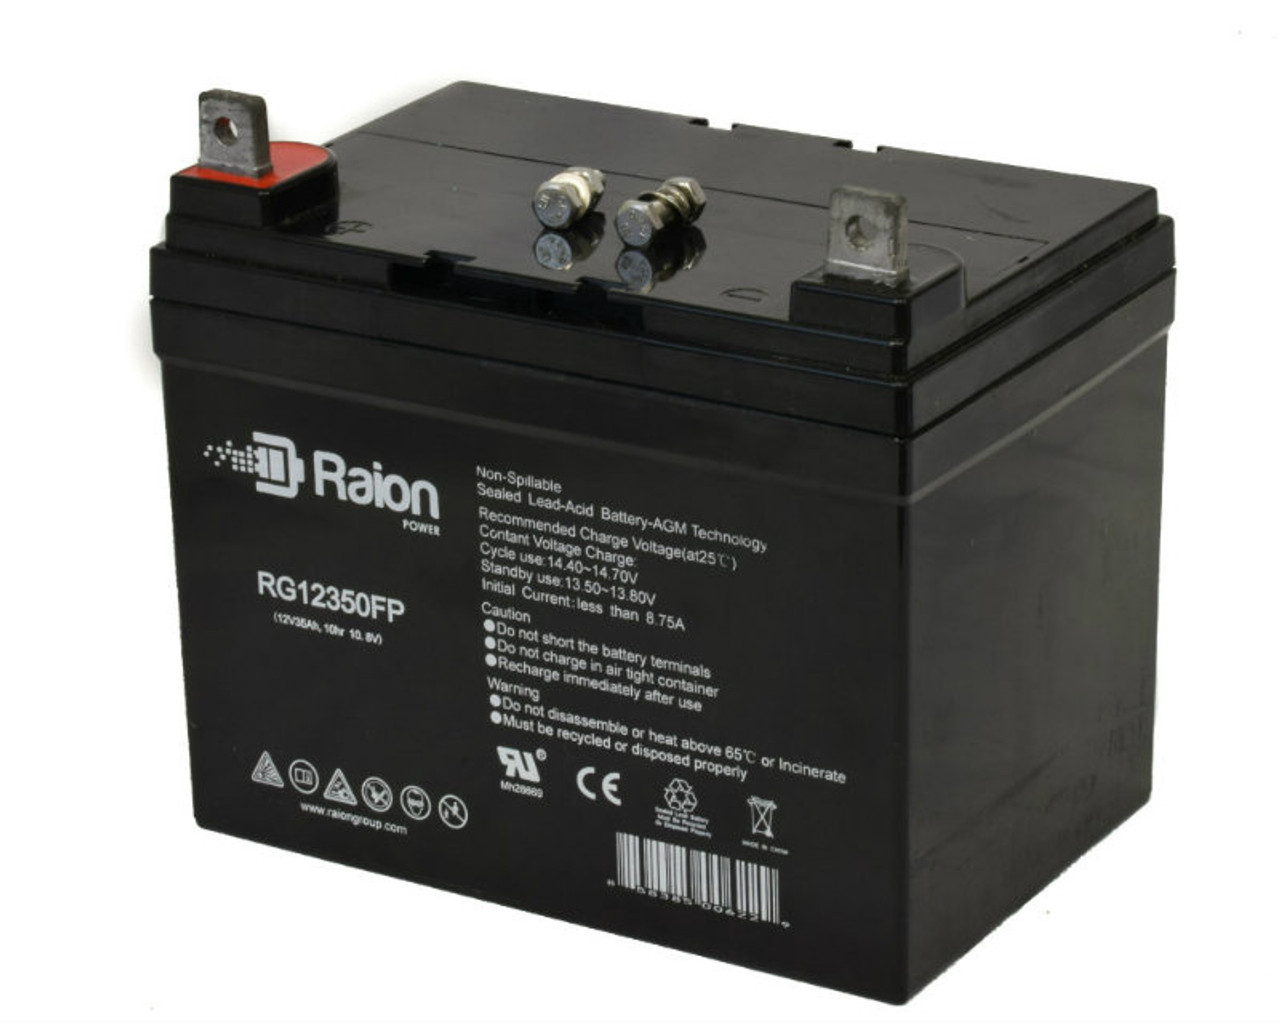 Raion Power Replacement 12V 35Ah RG12350FP Battery for Kees Manufacturing ZT MAX RIDER